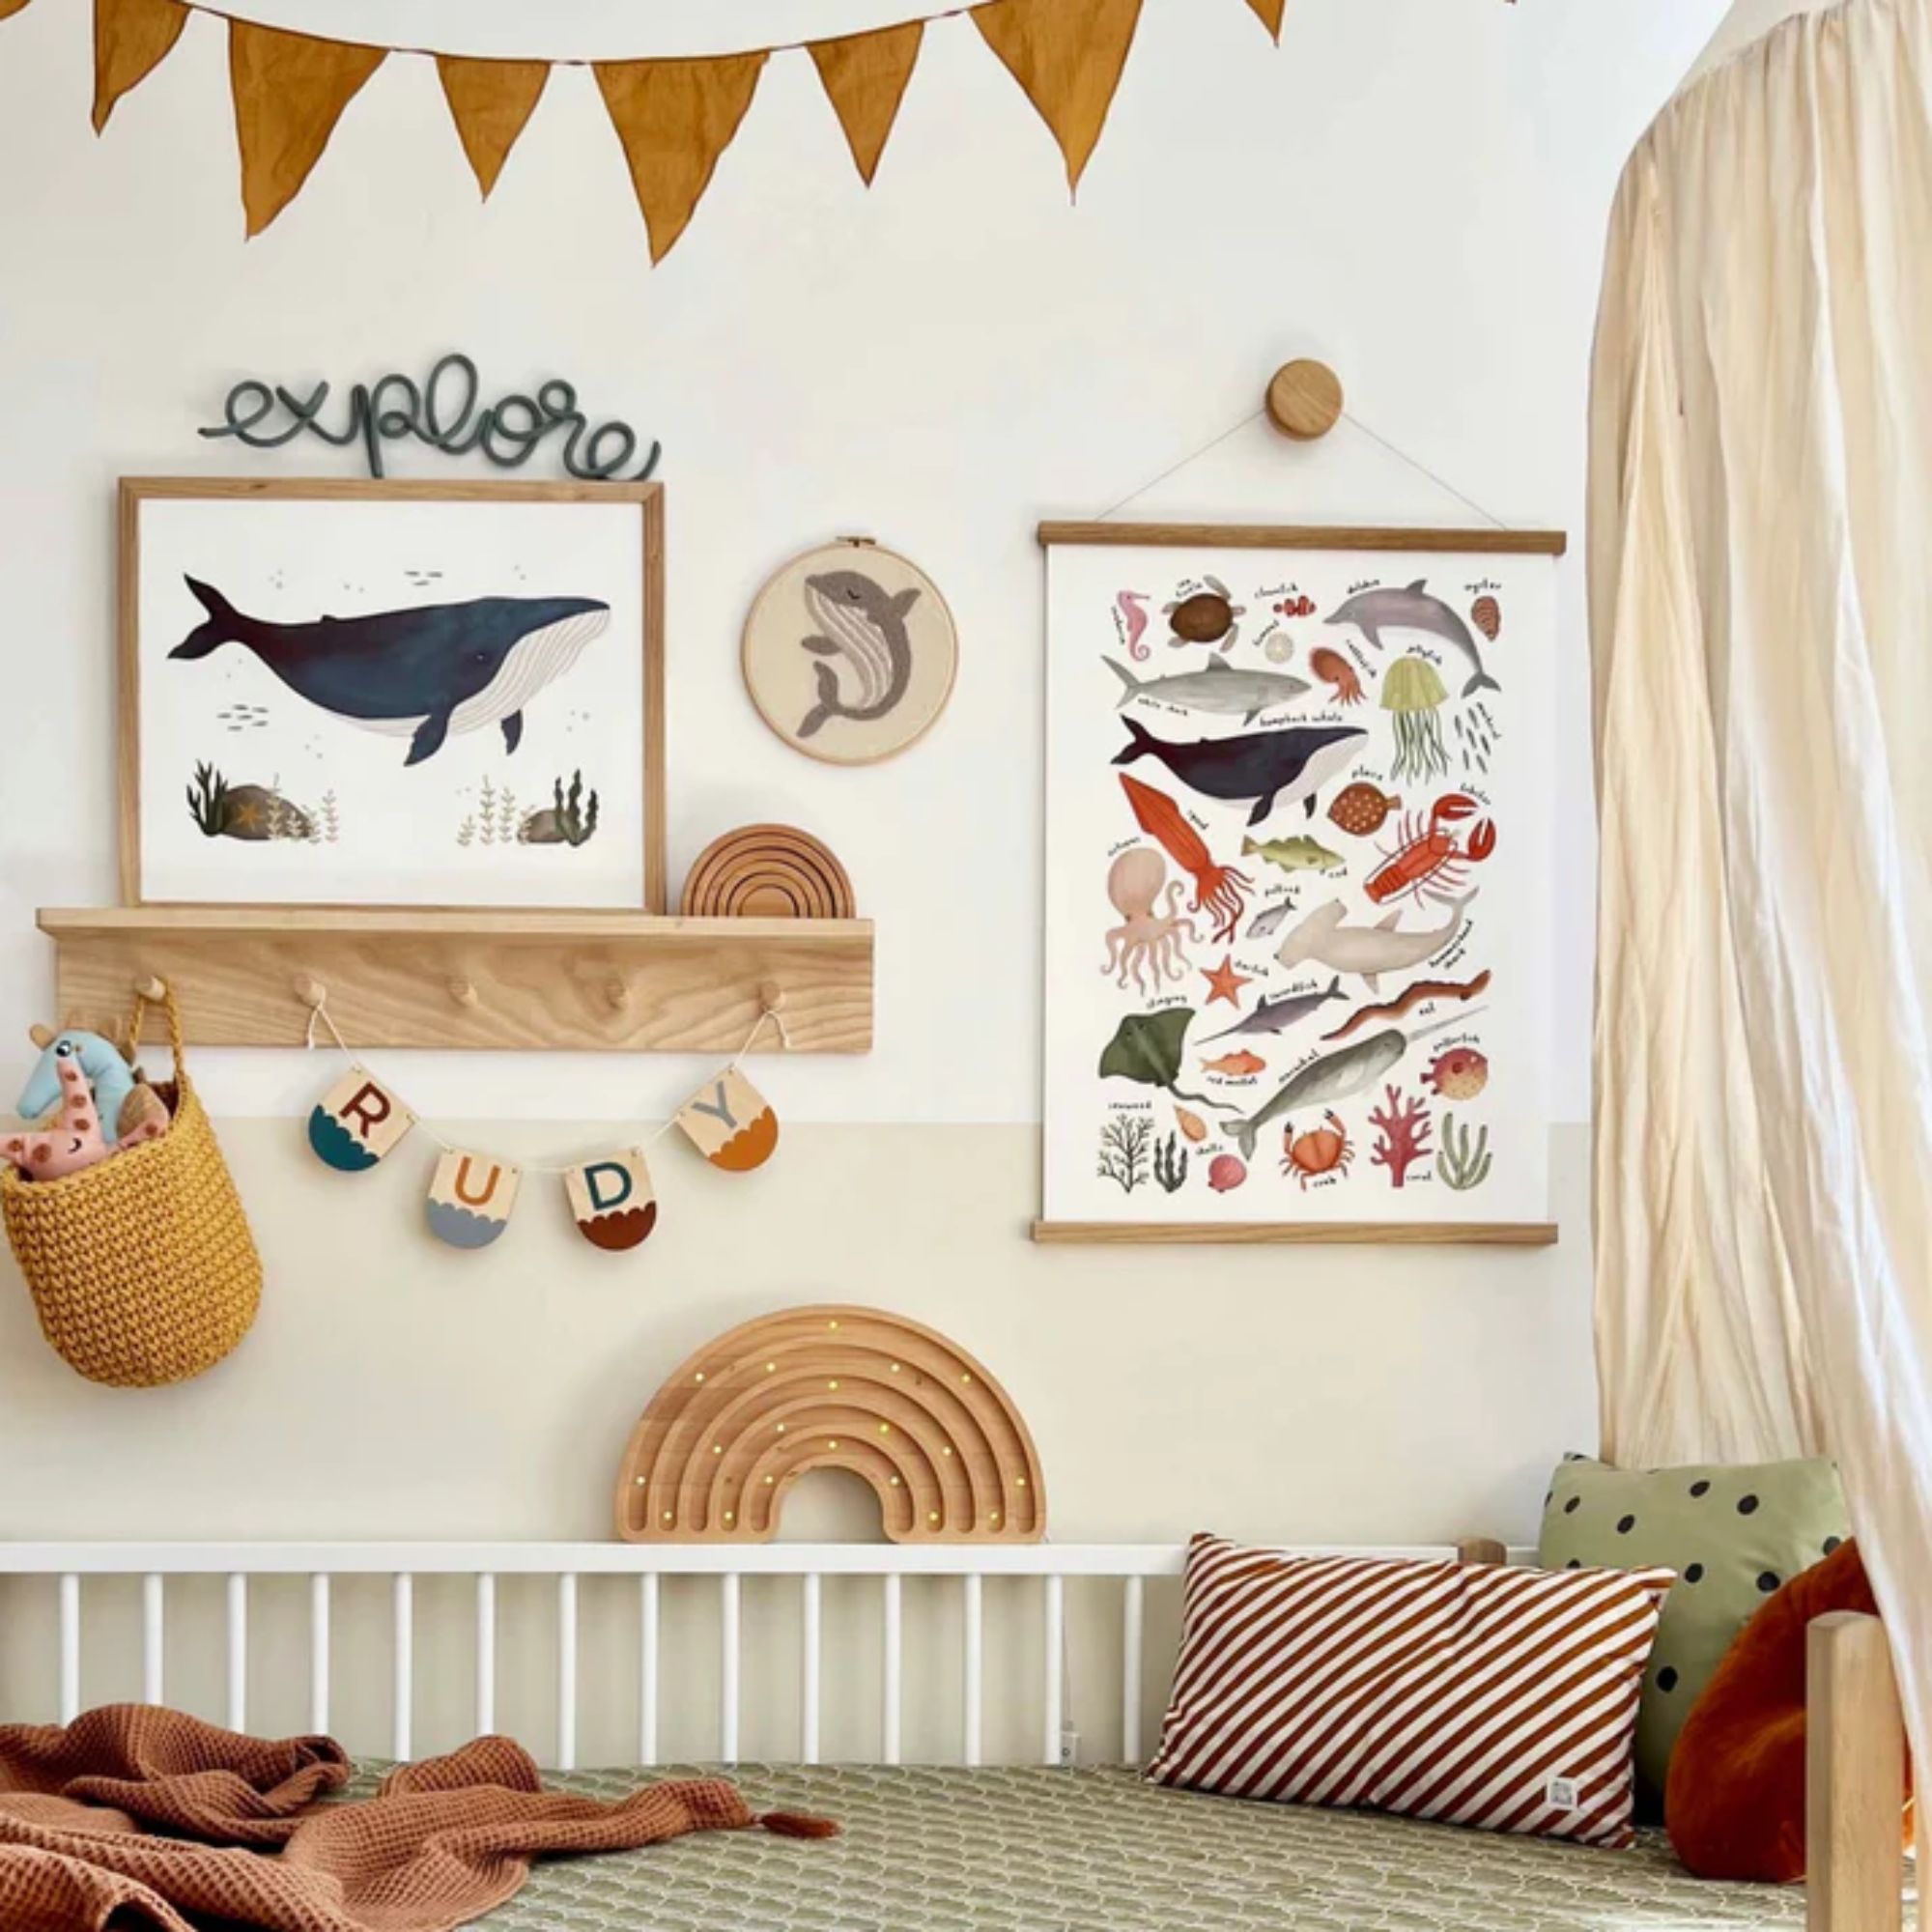 A nursery decorated with an under-the-sea theme (including an ocean chart on the wall)